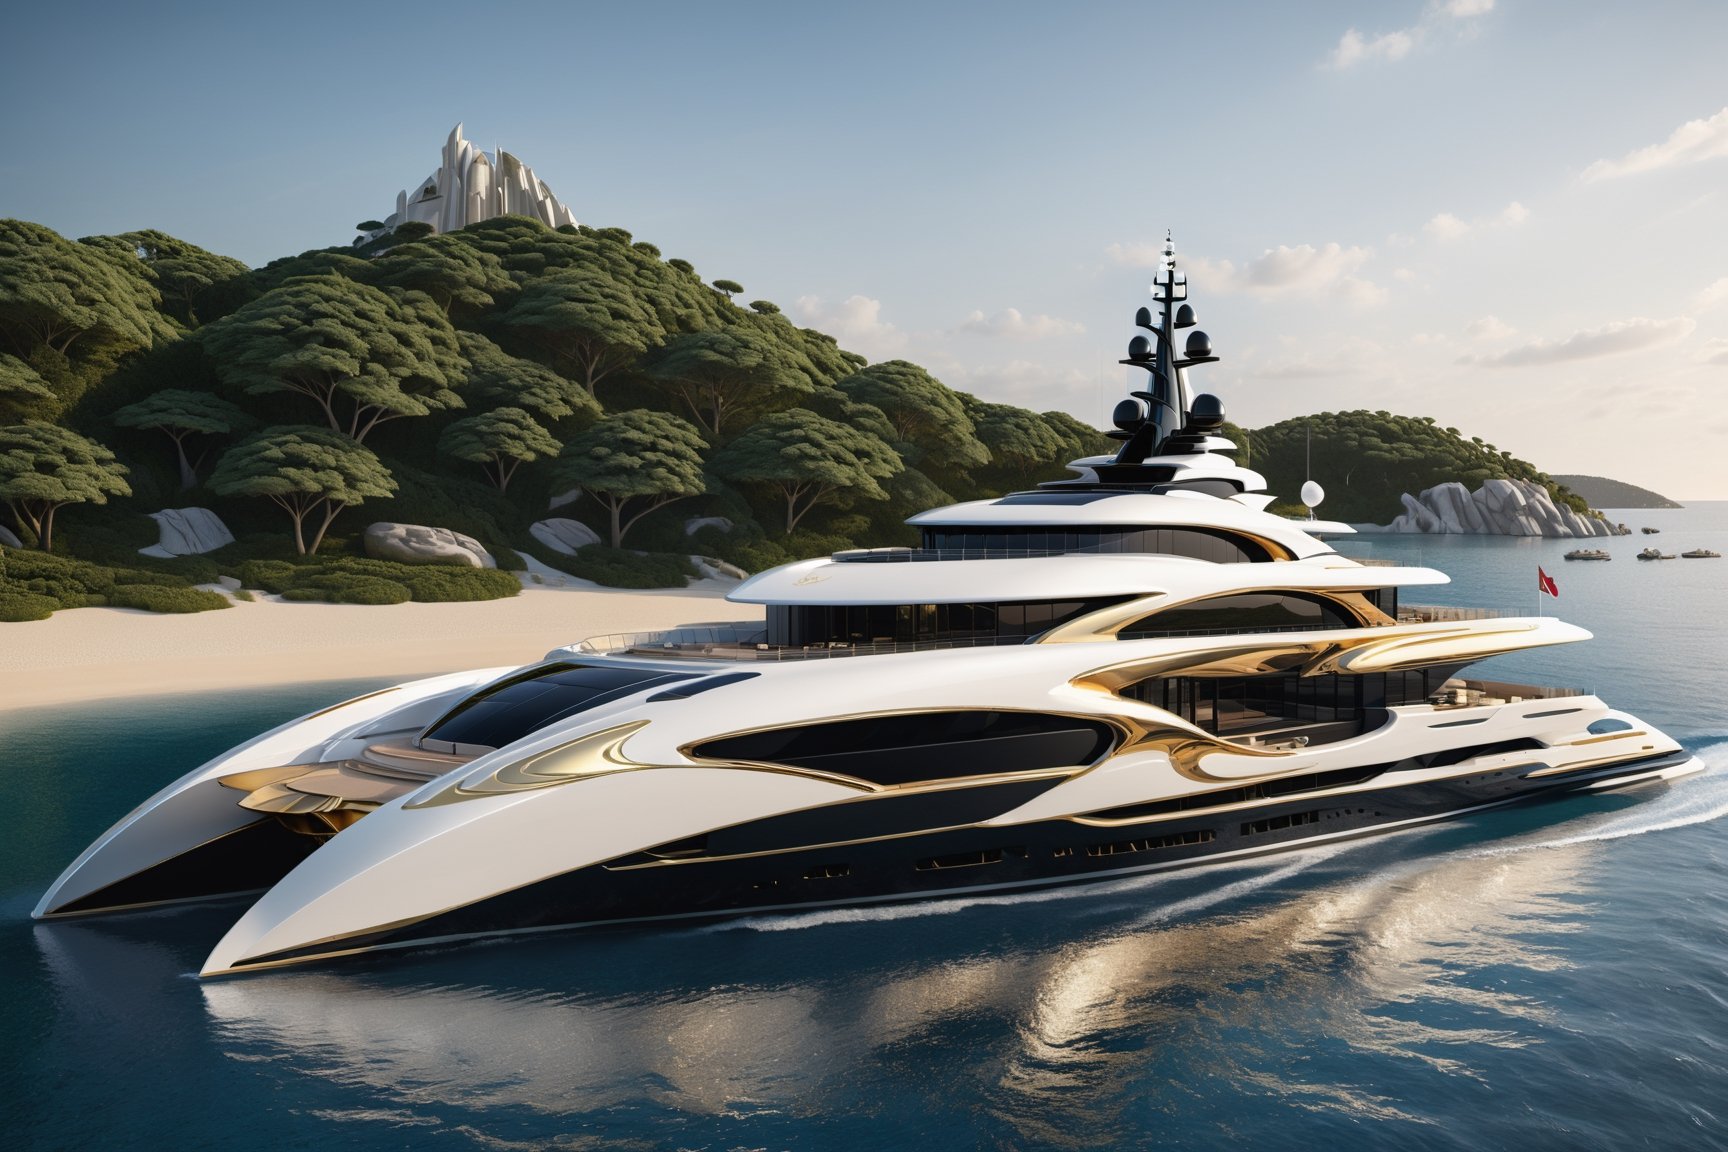 High definition photorealistic render of a luxury super yacht on a private beach, very sculptural and with fluid and organic shapes, with symmetrical curves in the shape of dragon wings inspired by the style of Zaha Hadid, gold, with black and white details. The design is inspired by the Tomorrowland 2022 main stage, with ultra-realistic Art Deco details and a high level of image complexity